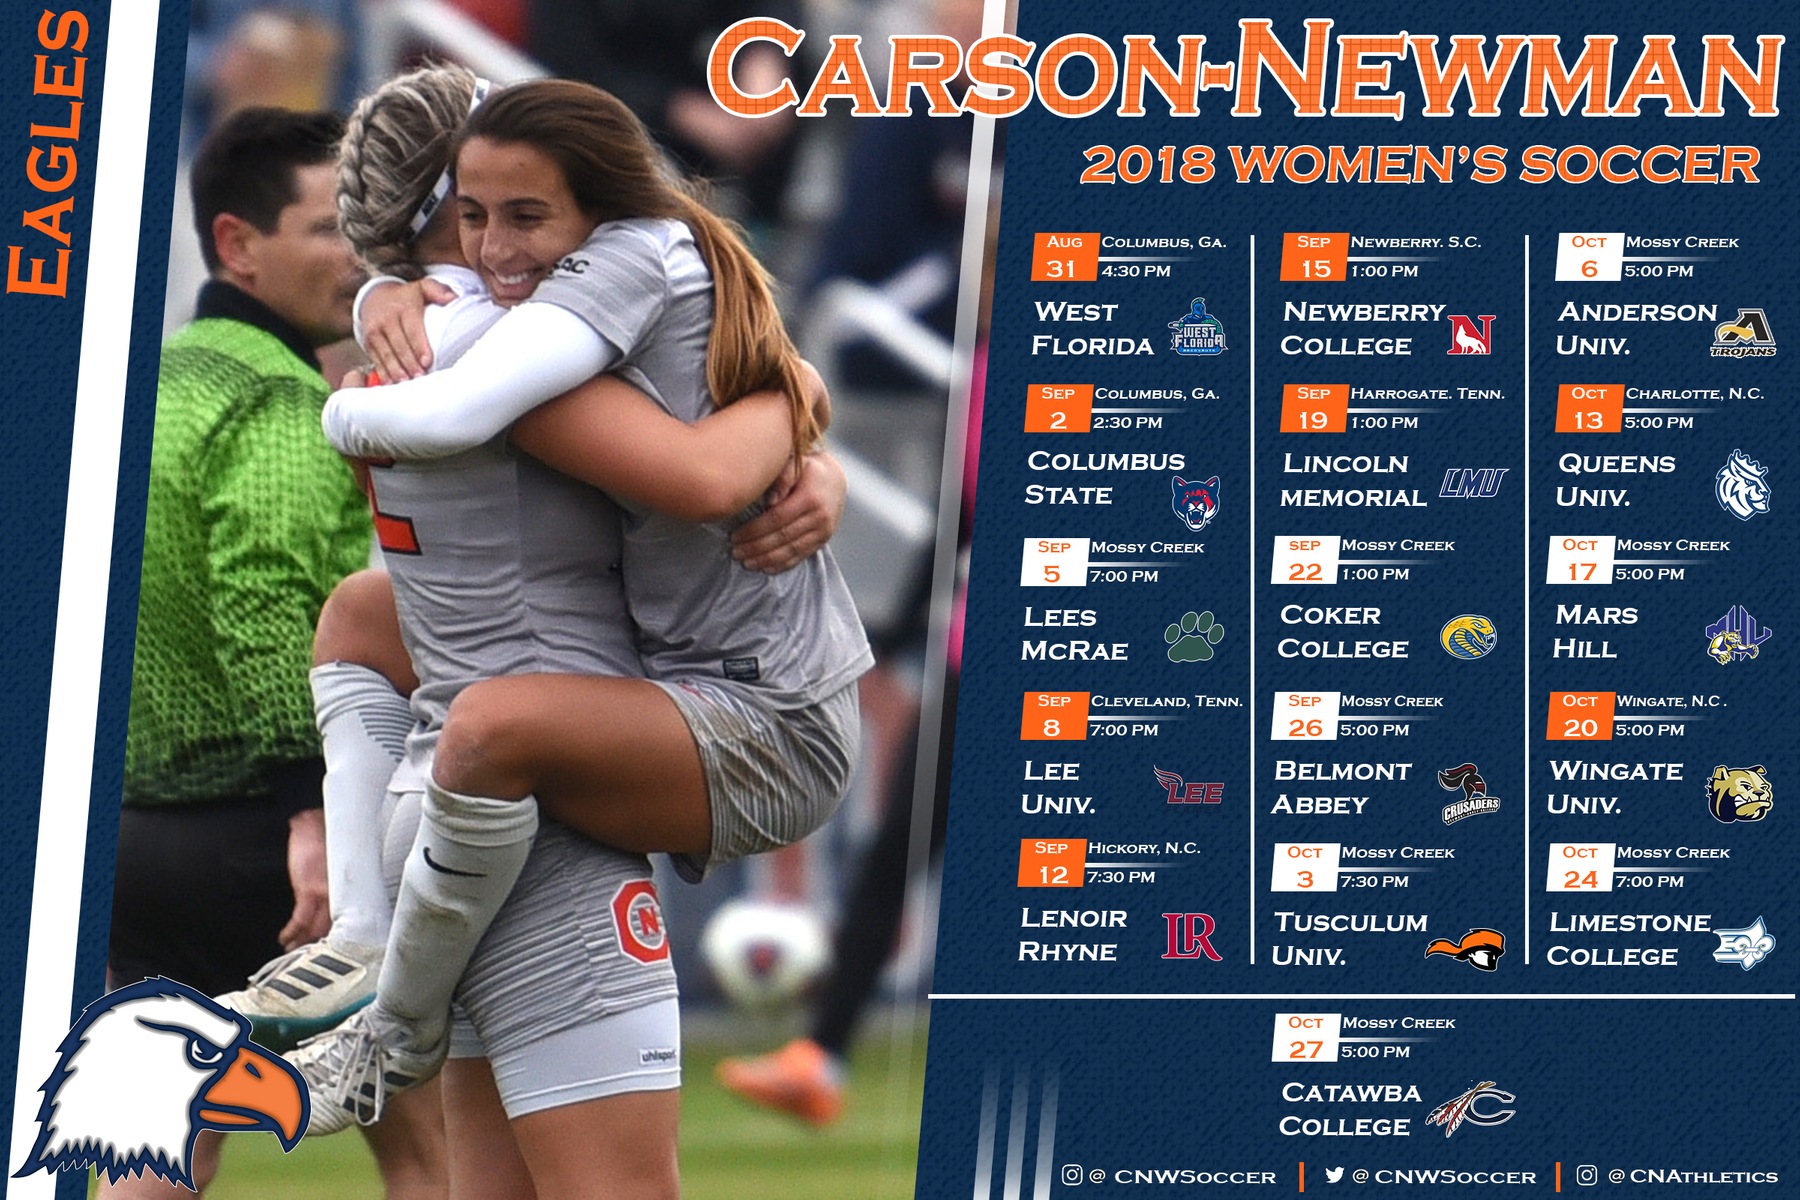 Formidable schedule awaits women's soccer for the 2018 campaign